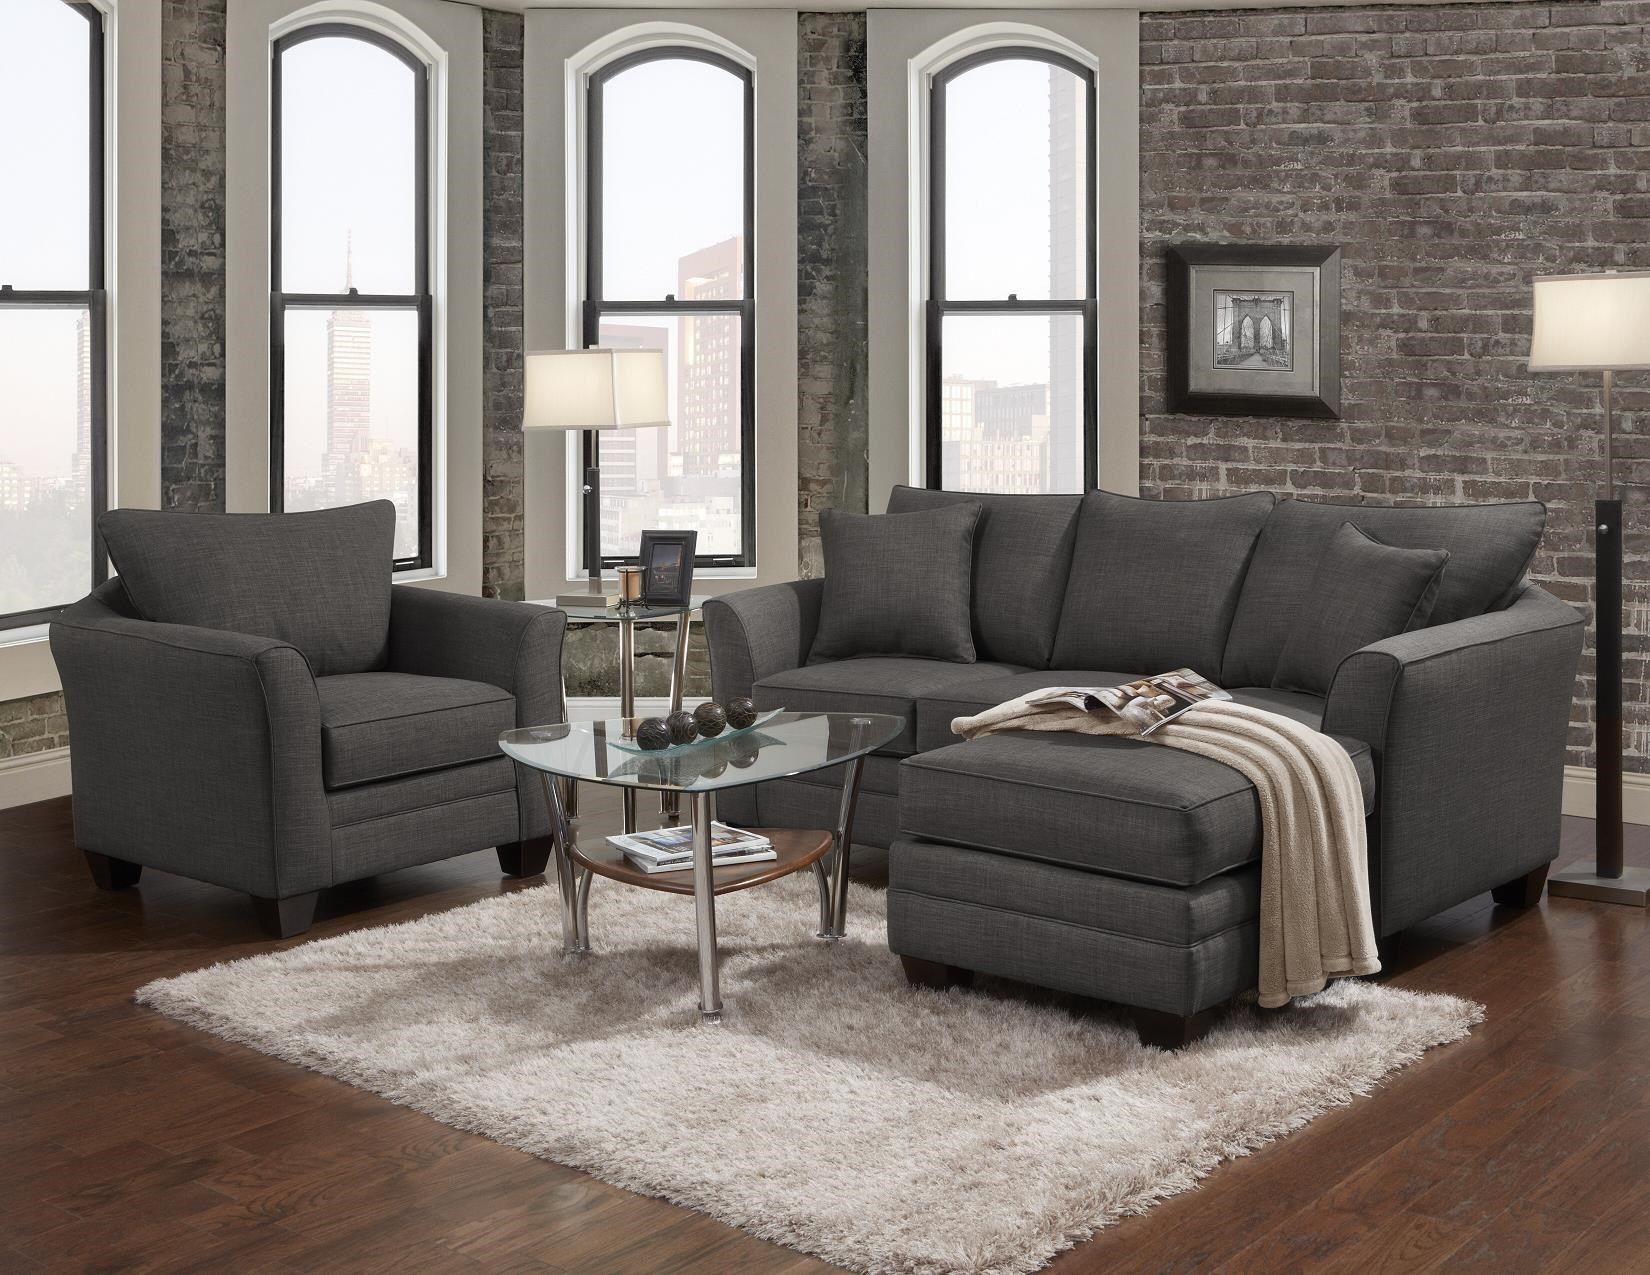 Transitional Sofa With Chaise Endj Henry | Wolf And Gardiner Throughout London Ontario Sectional Sofas (View 4 of 10)